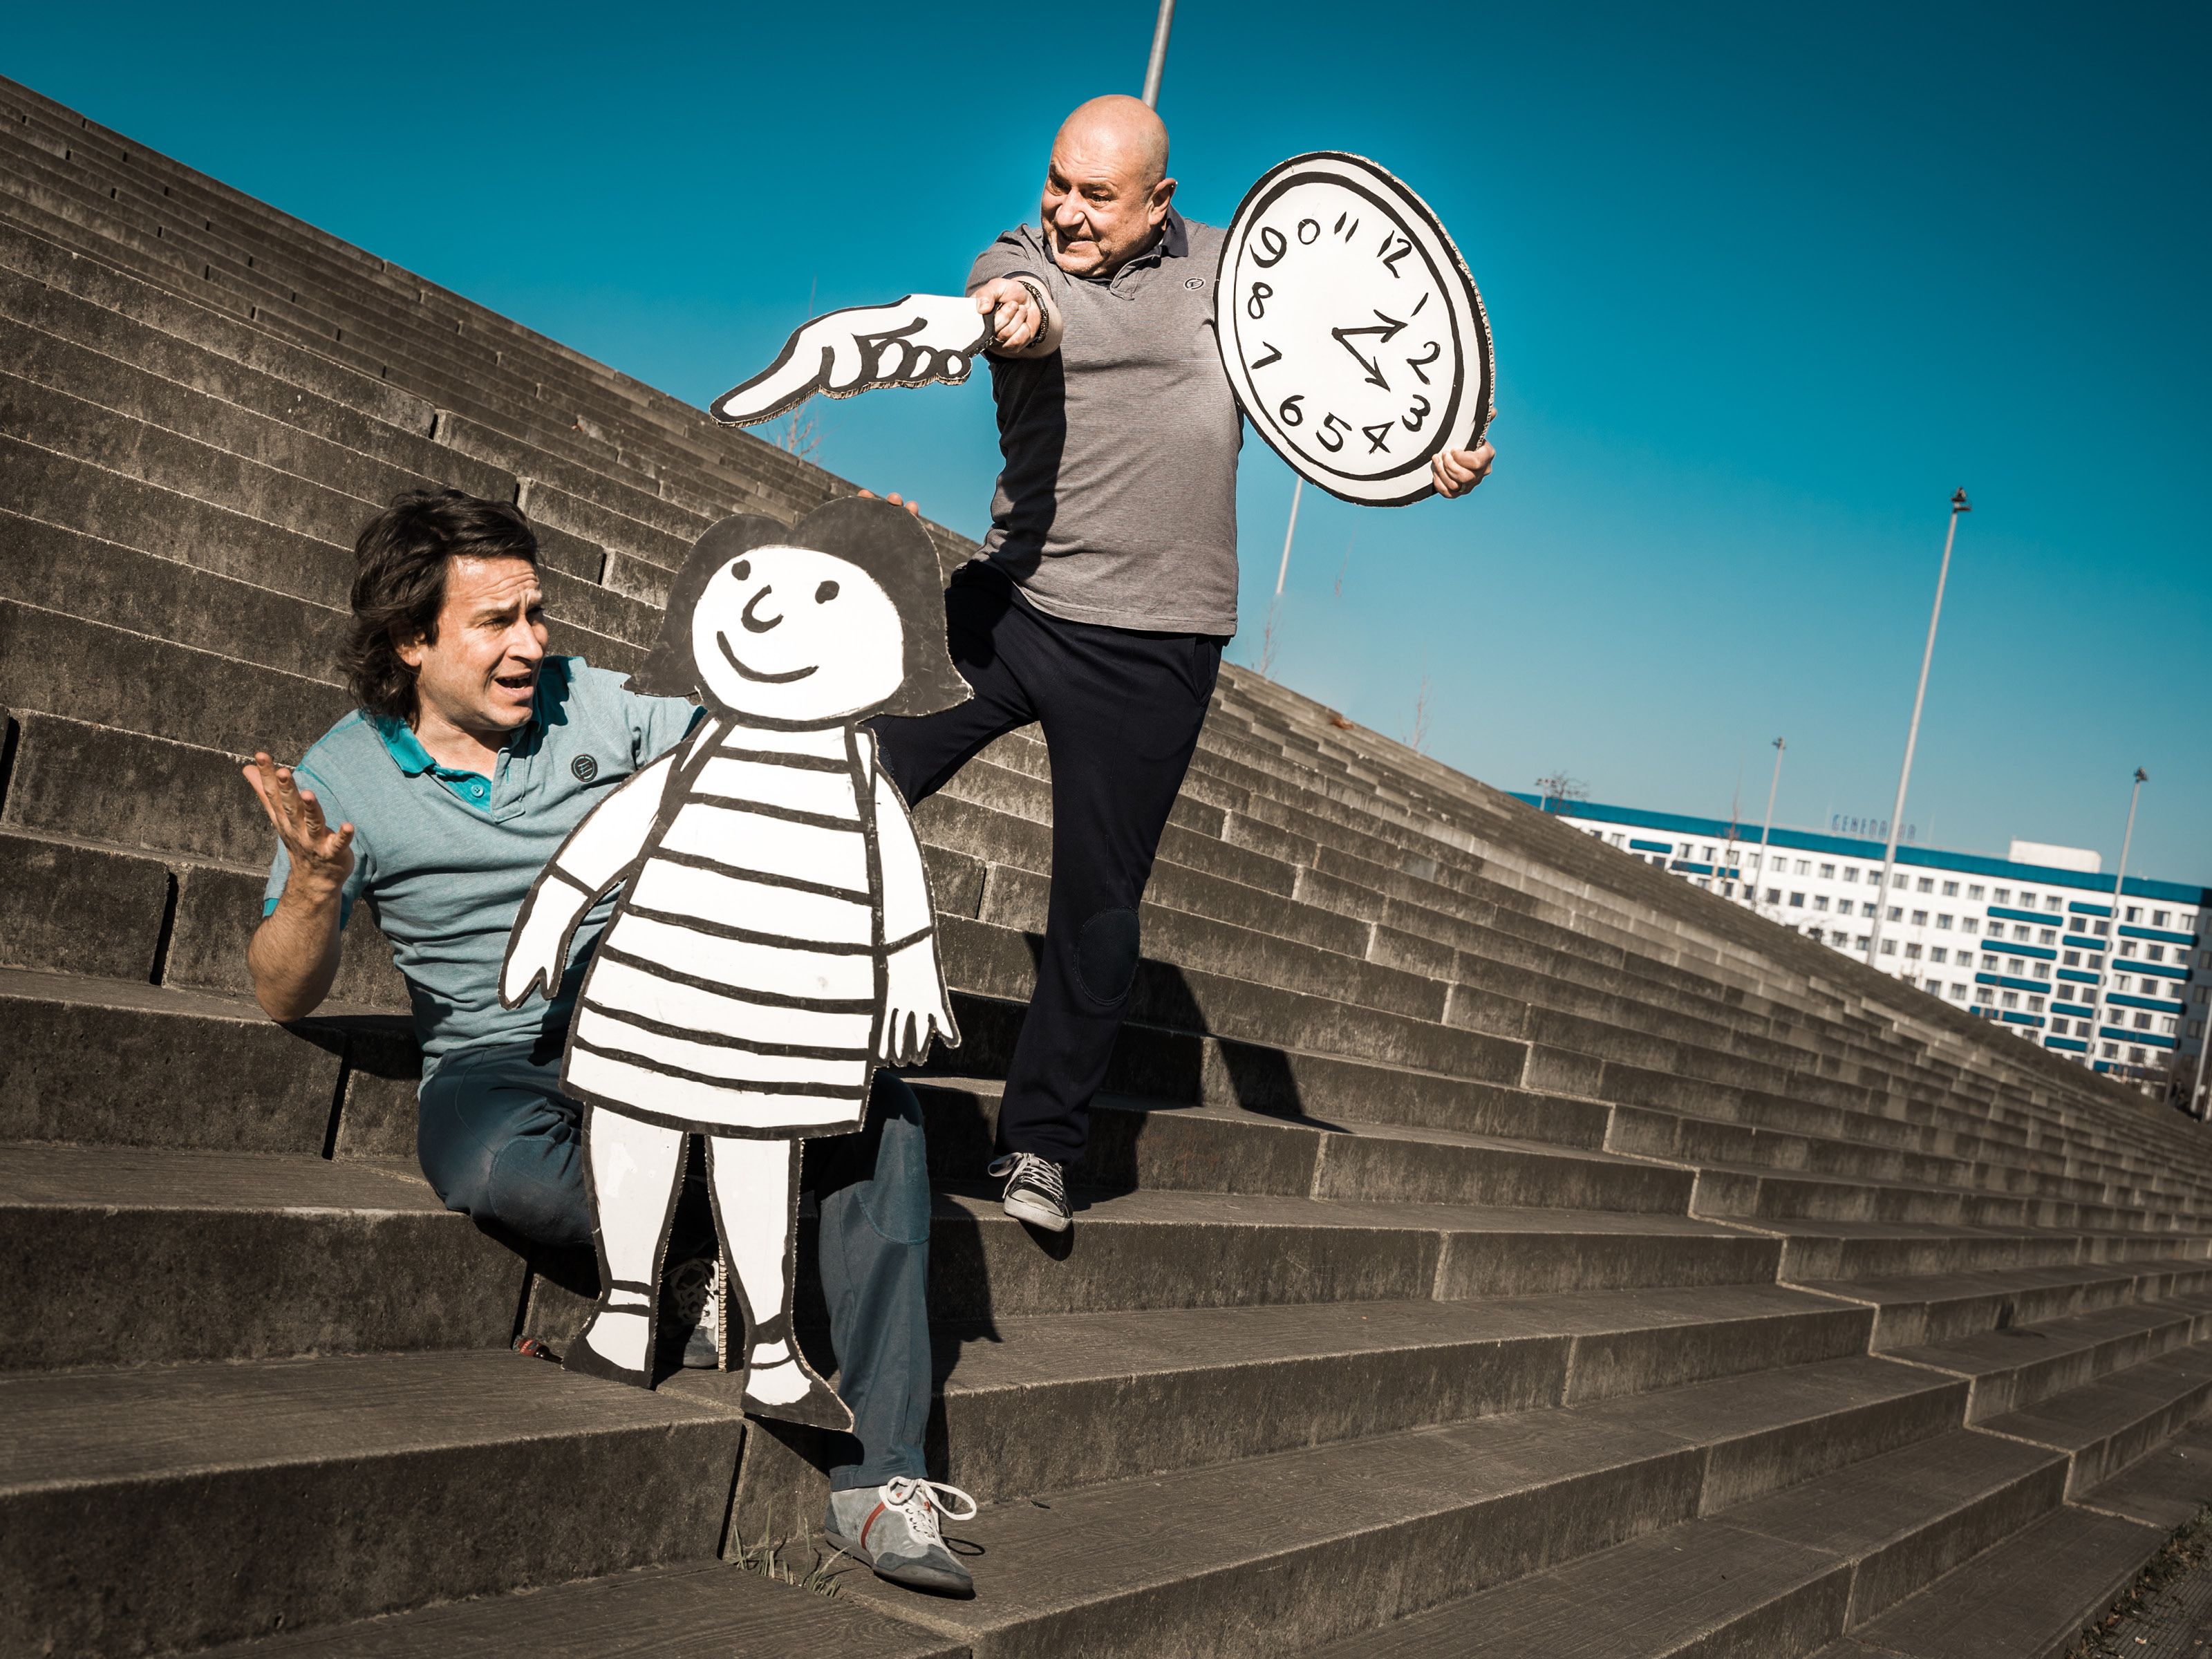 The black and white flat figure of Bettina, a little girl with shoulder-length dark hair, is standing on a staircase. She is being held by a puppeteer. In the background is another puppeteer with the flat figure of a clock and a pointing hand in his hands.